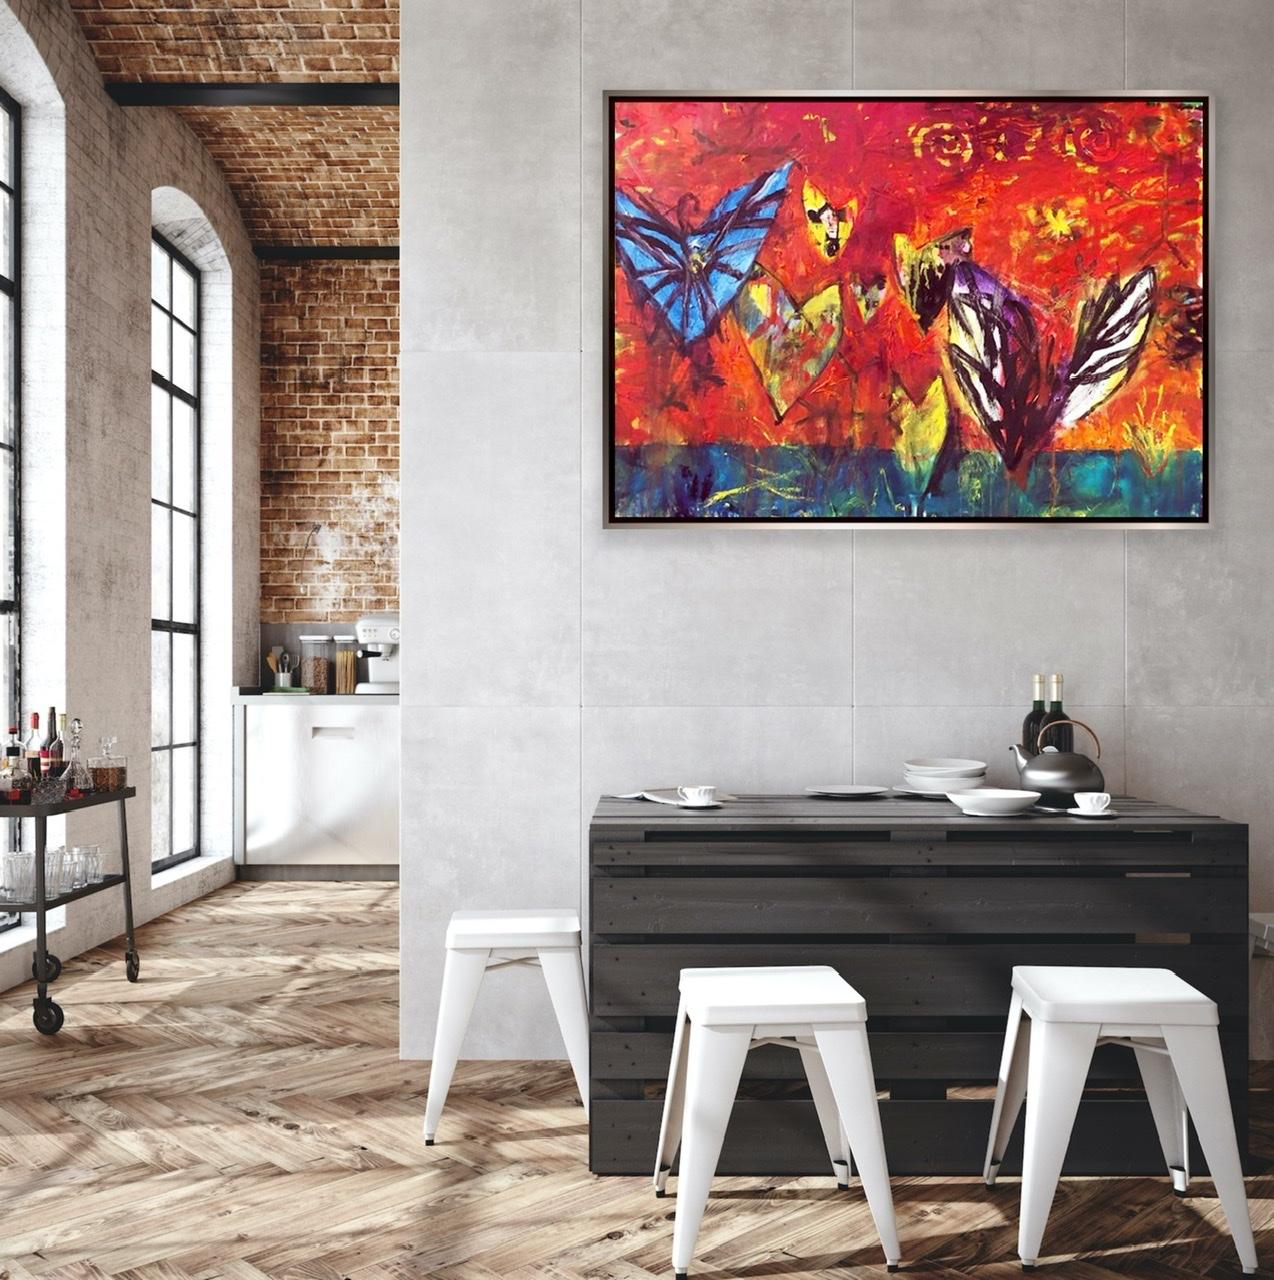 Starburst - Neo-Expressionist Painting by Ford Crull